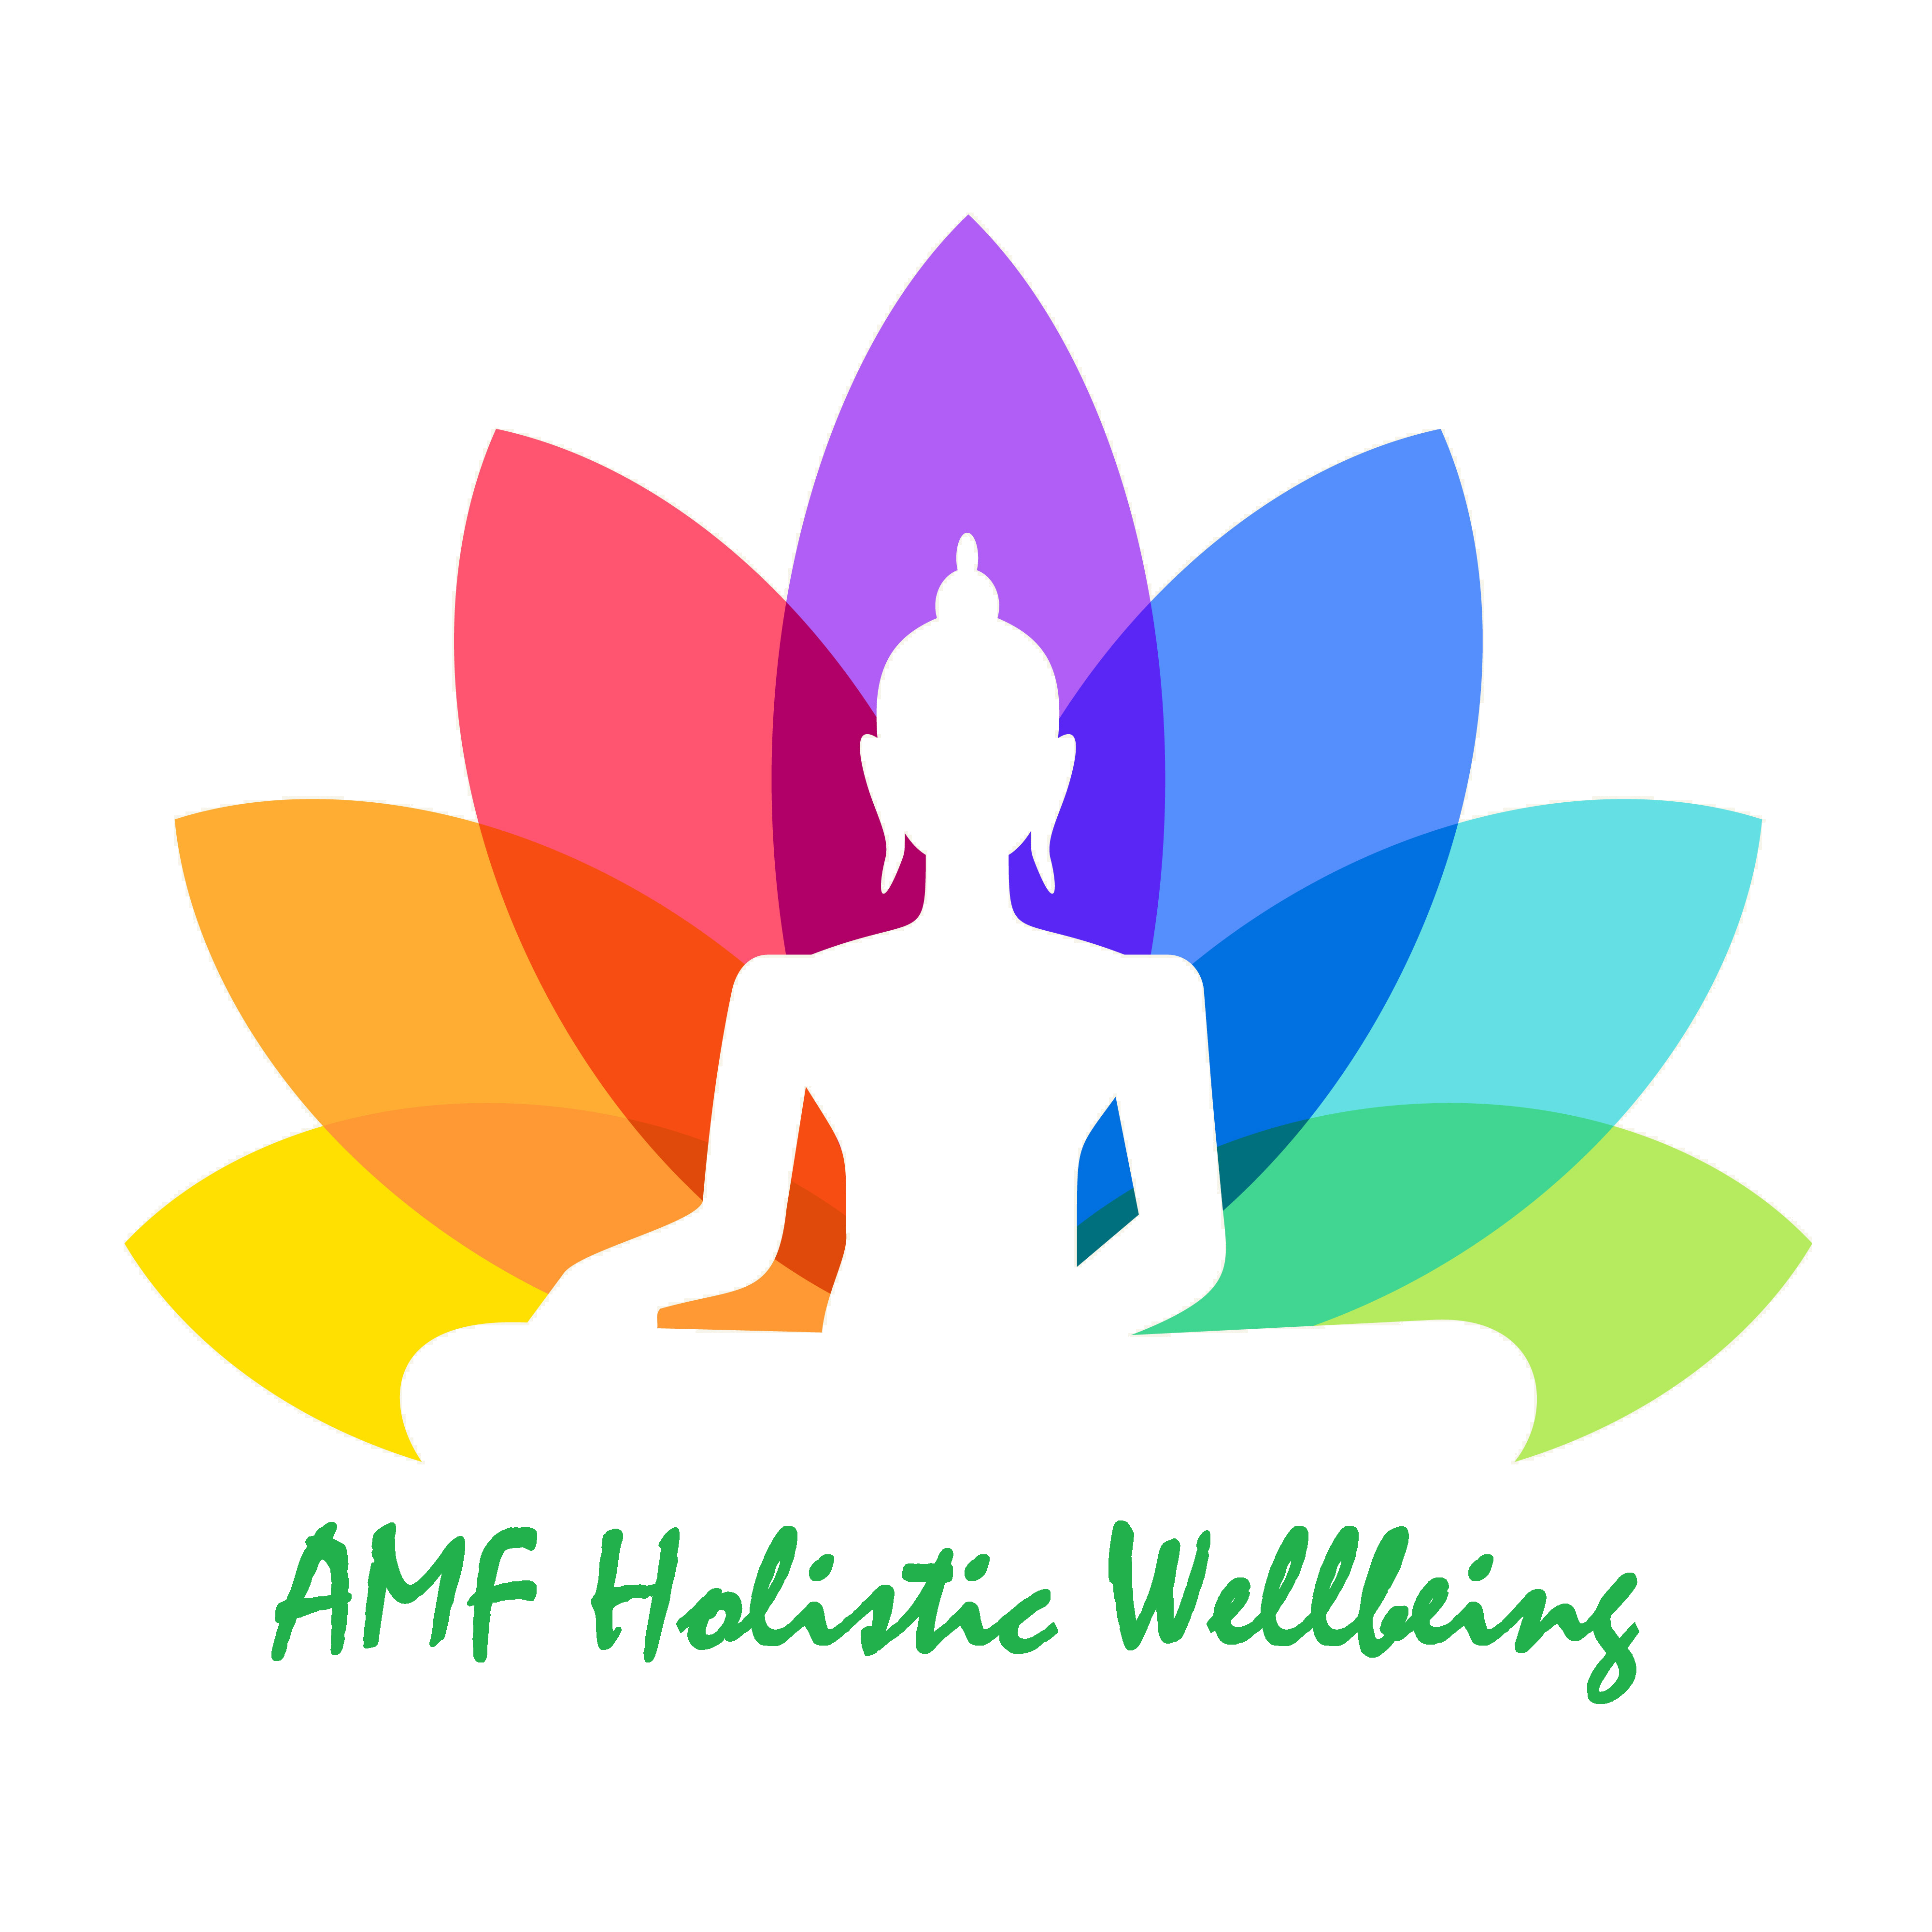 AMF Holistic Well-Being